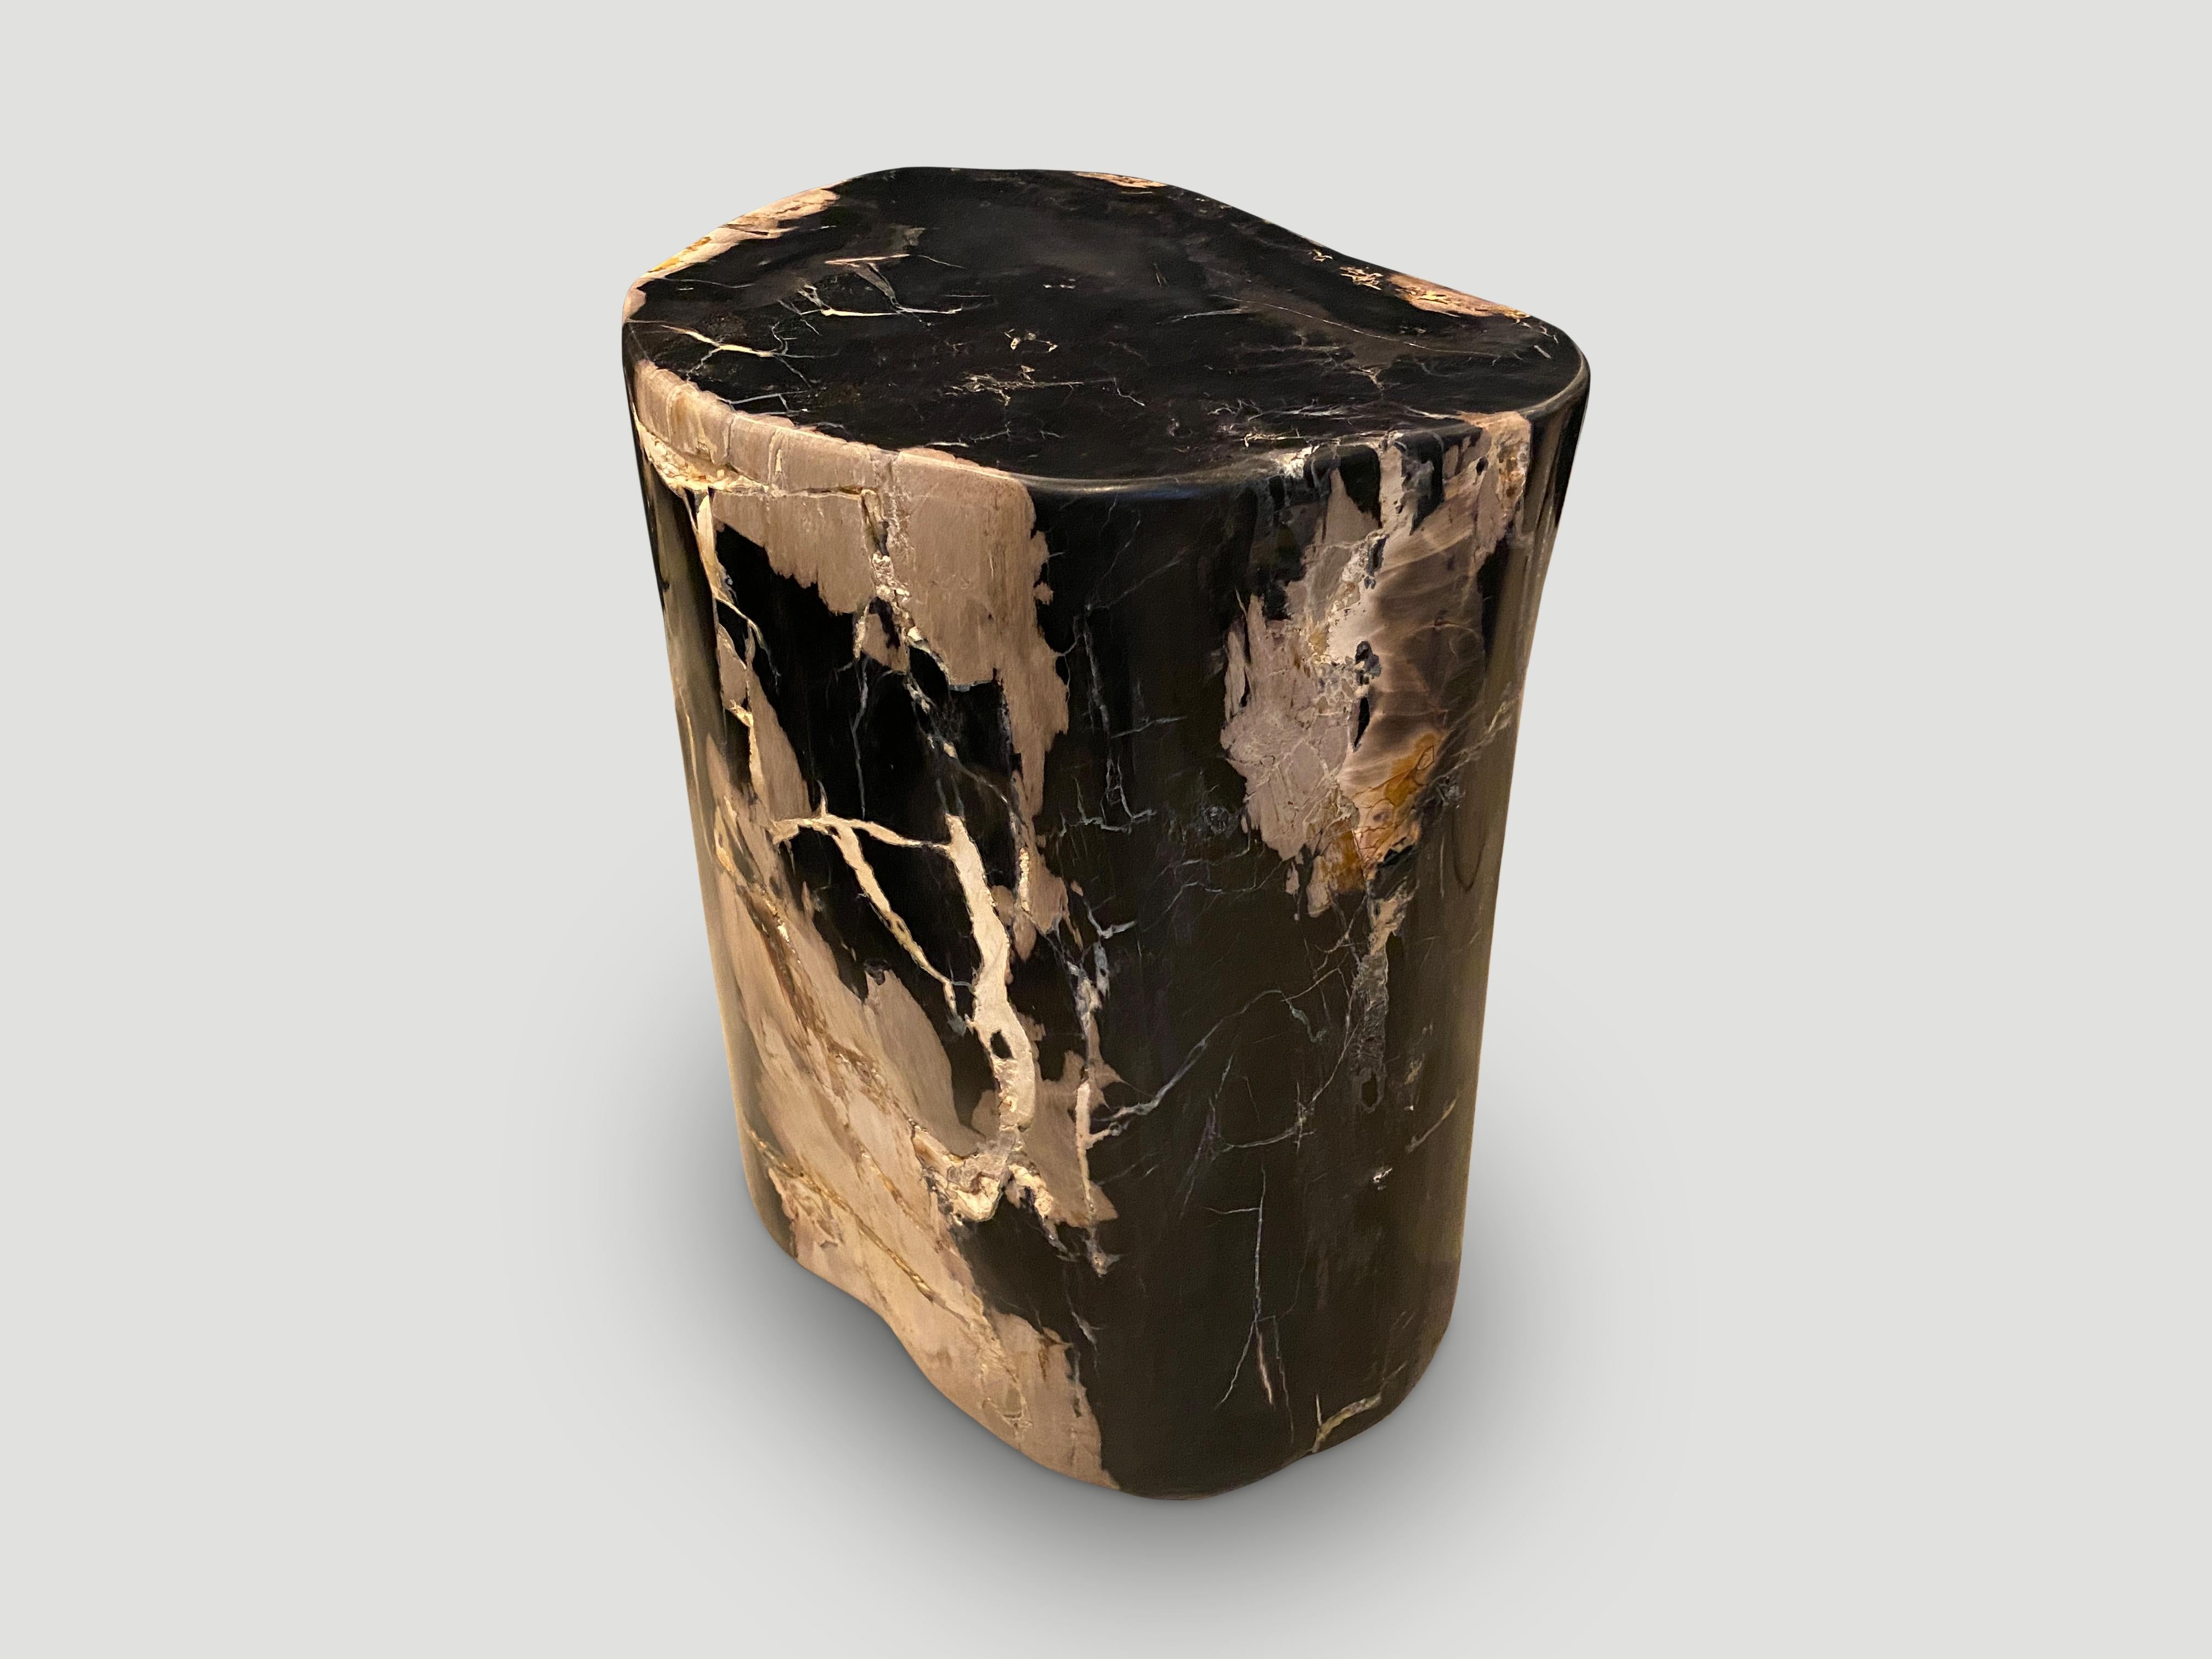 Impressive beautiful contrasting tones and textures on this ancient petrified wood side table. It’s fascinating how Mother Nature produces these exquisite 40 million year old petrified teak logs with such contrasting colors and natural patterns